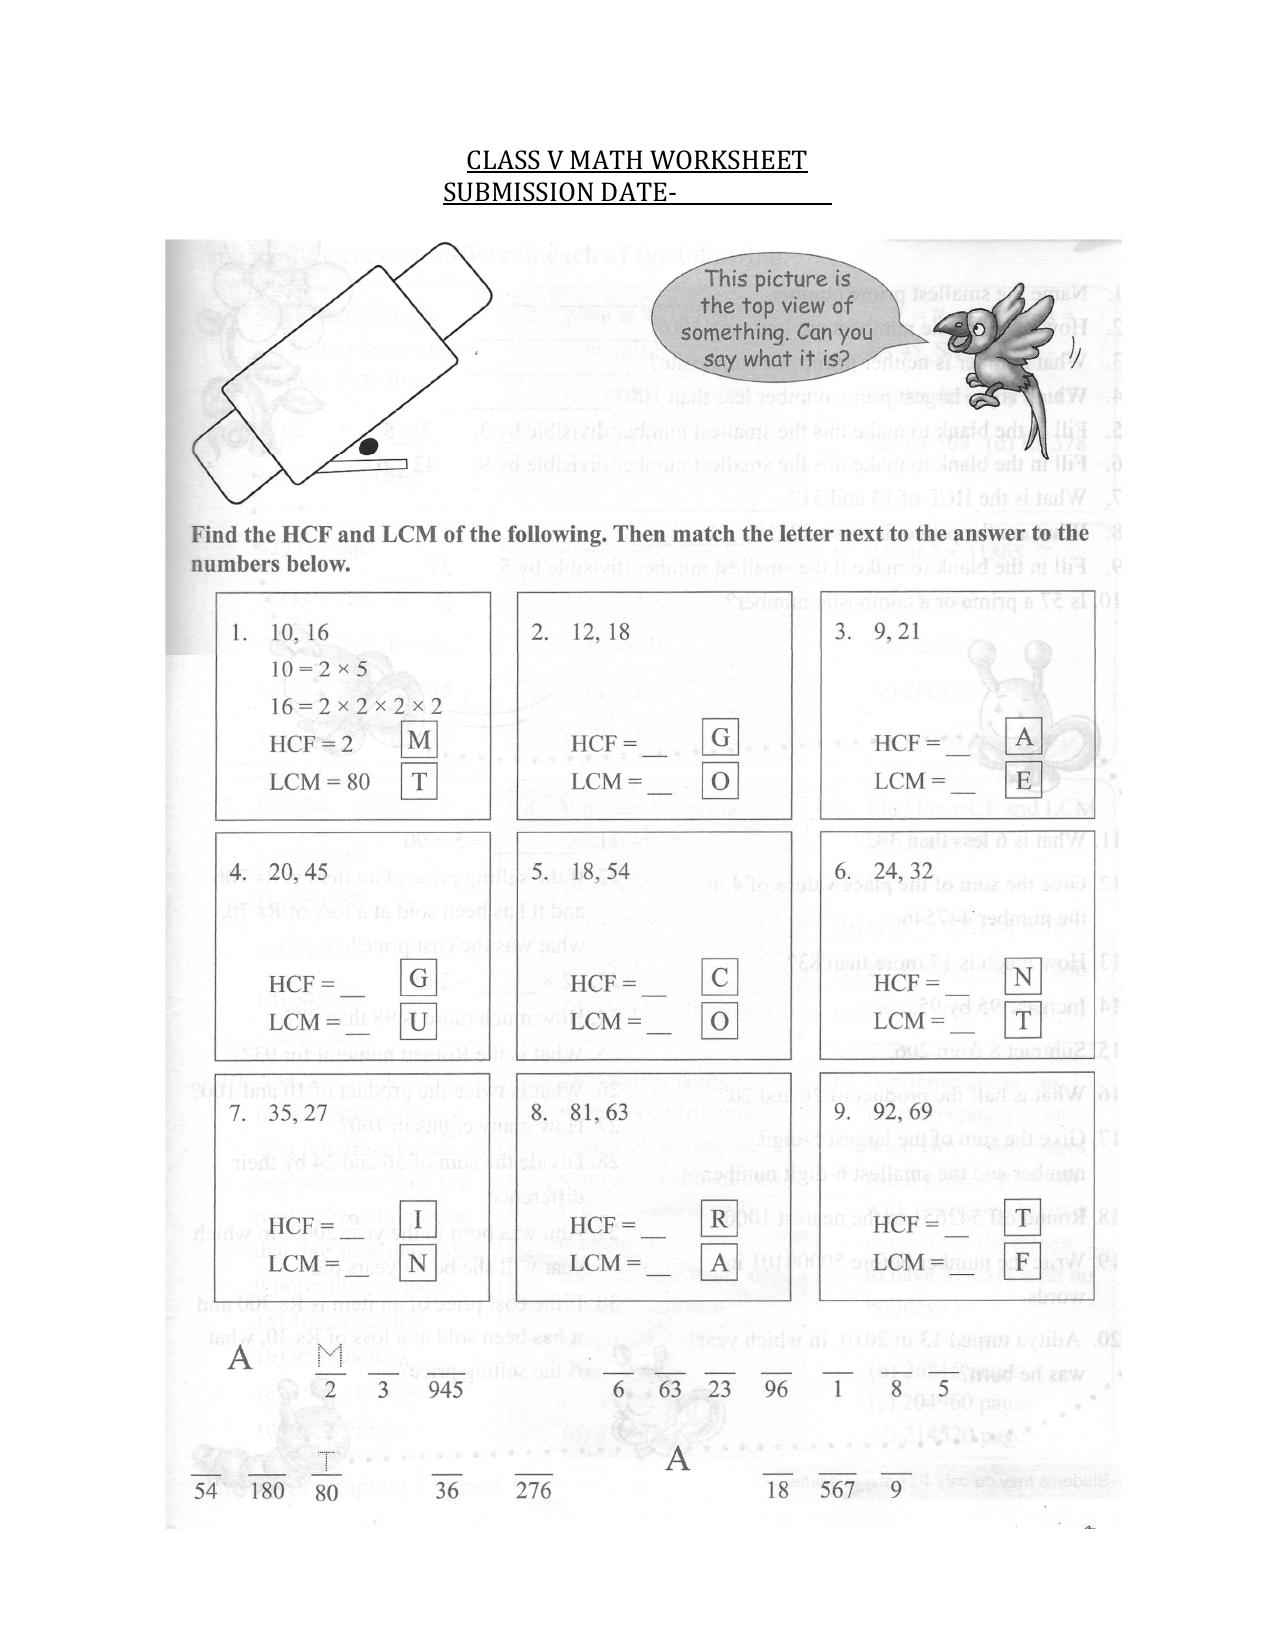 Worksheet for Class 5 Maths Assignment HCF and LCM - Page 1